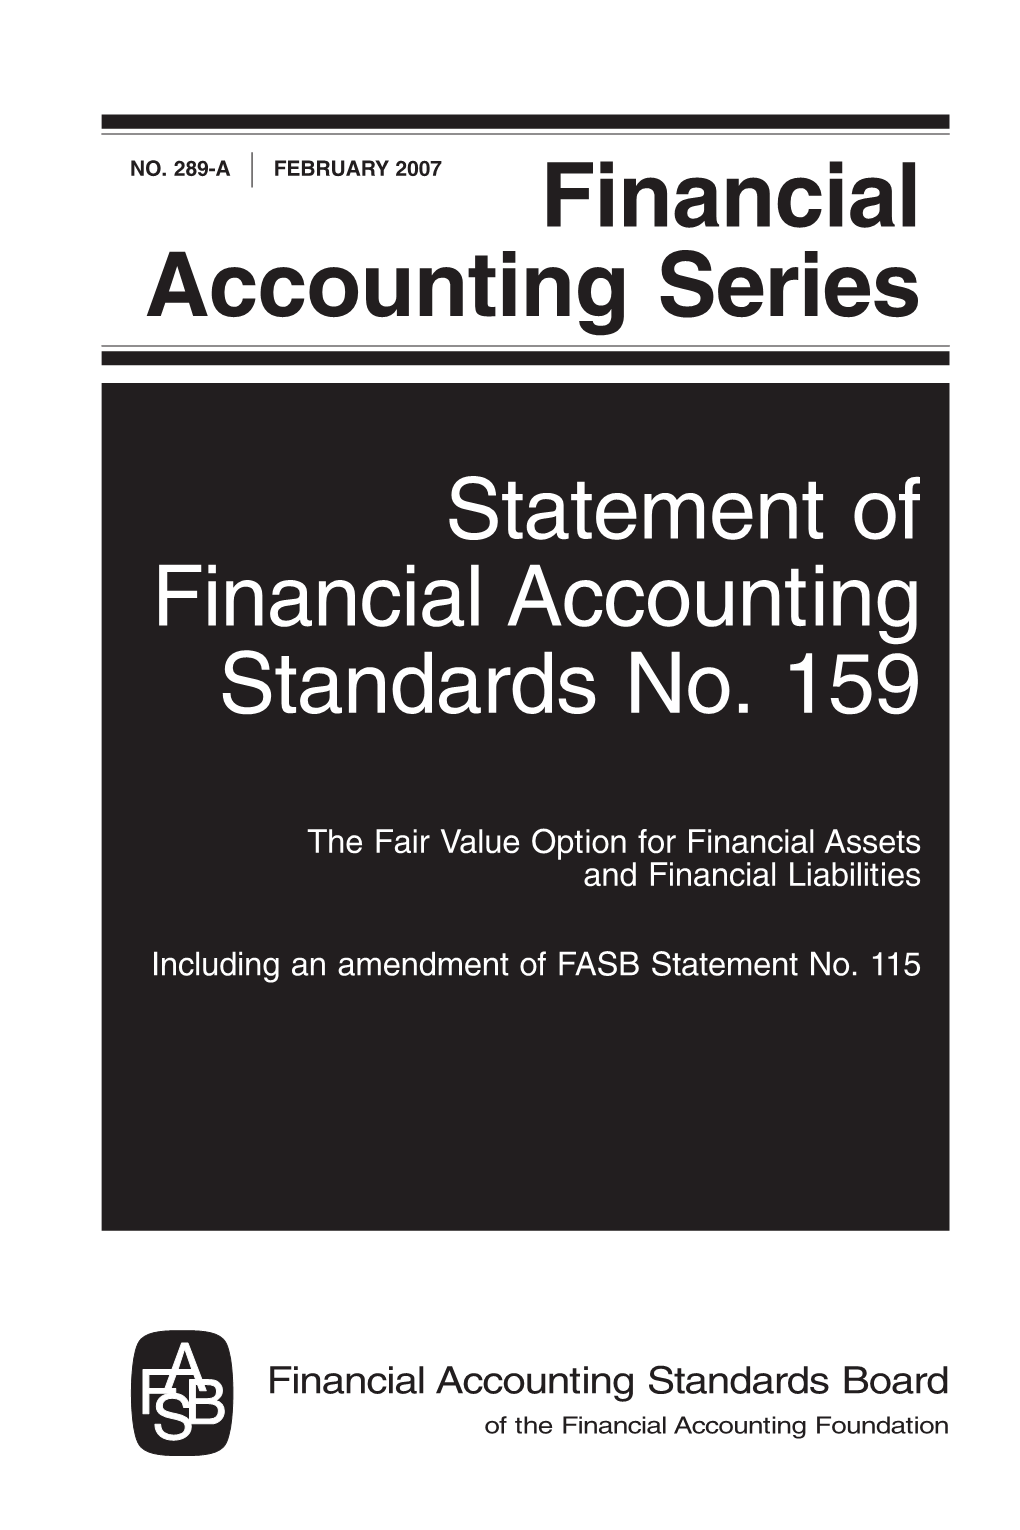 Statement of Financial Accounting Standards No. 159